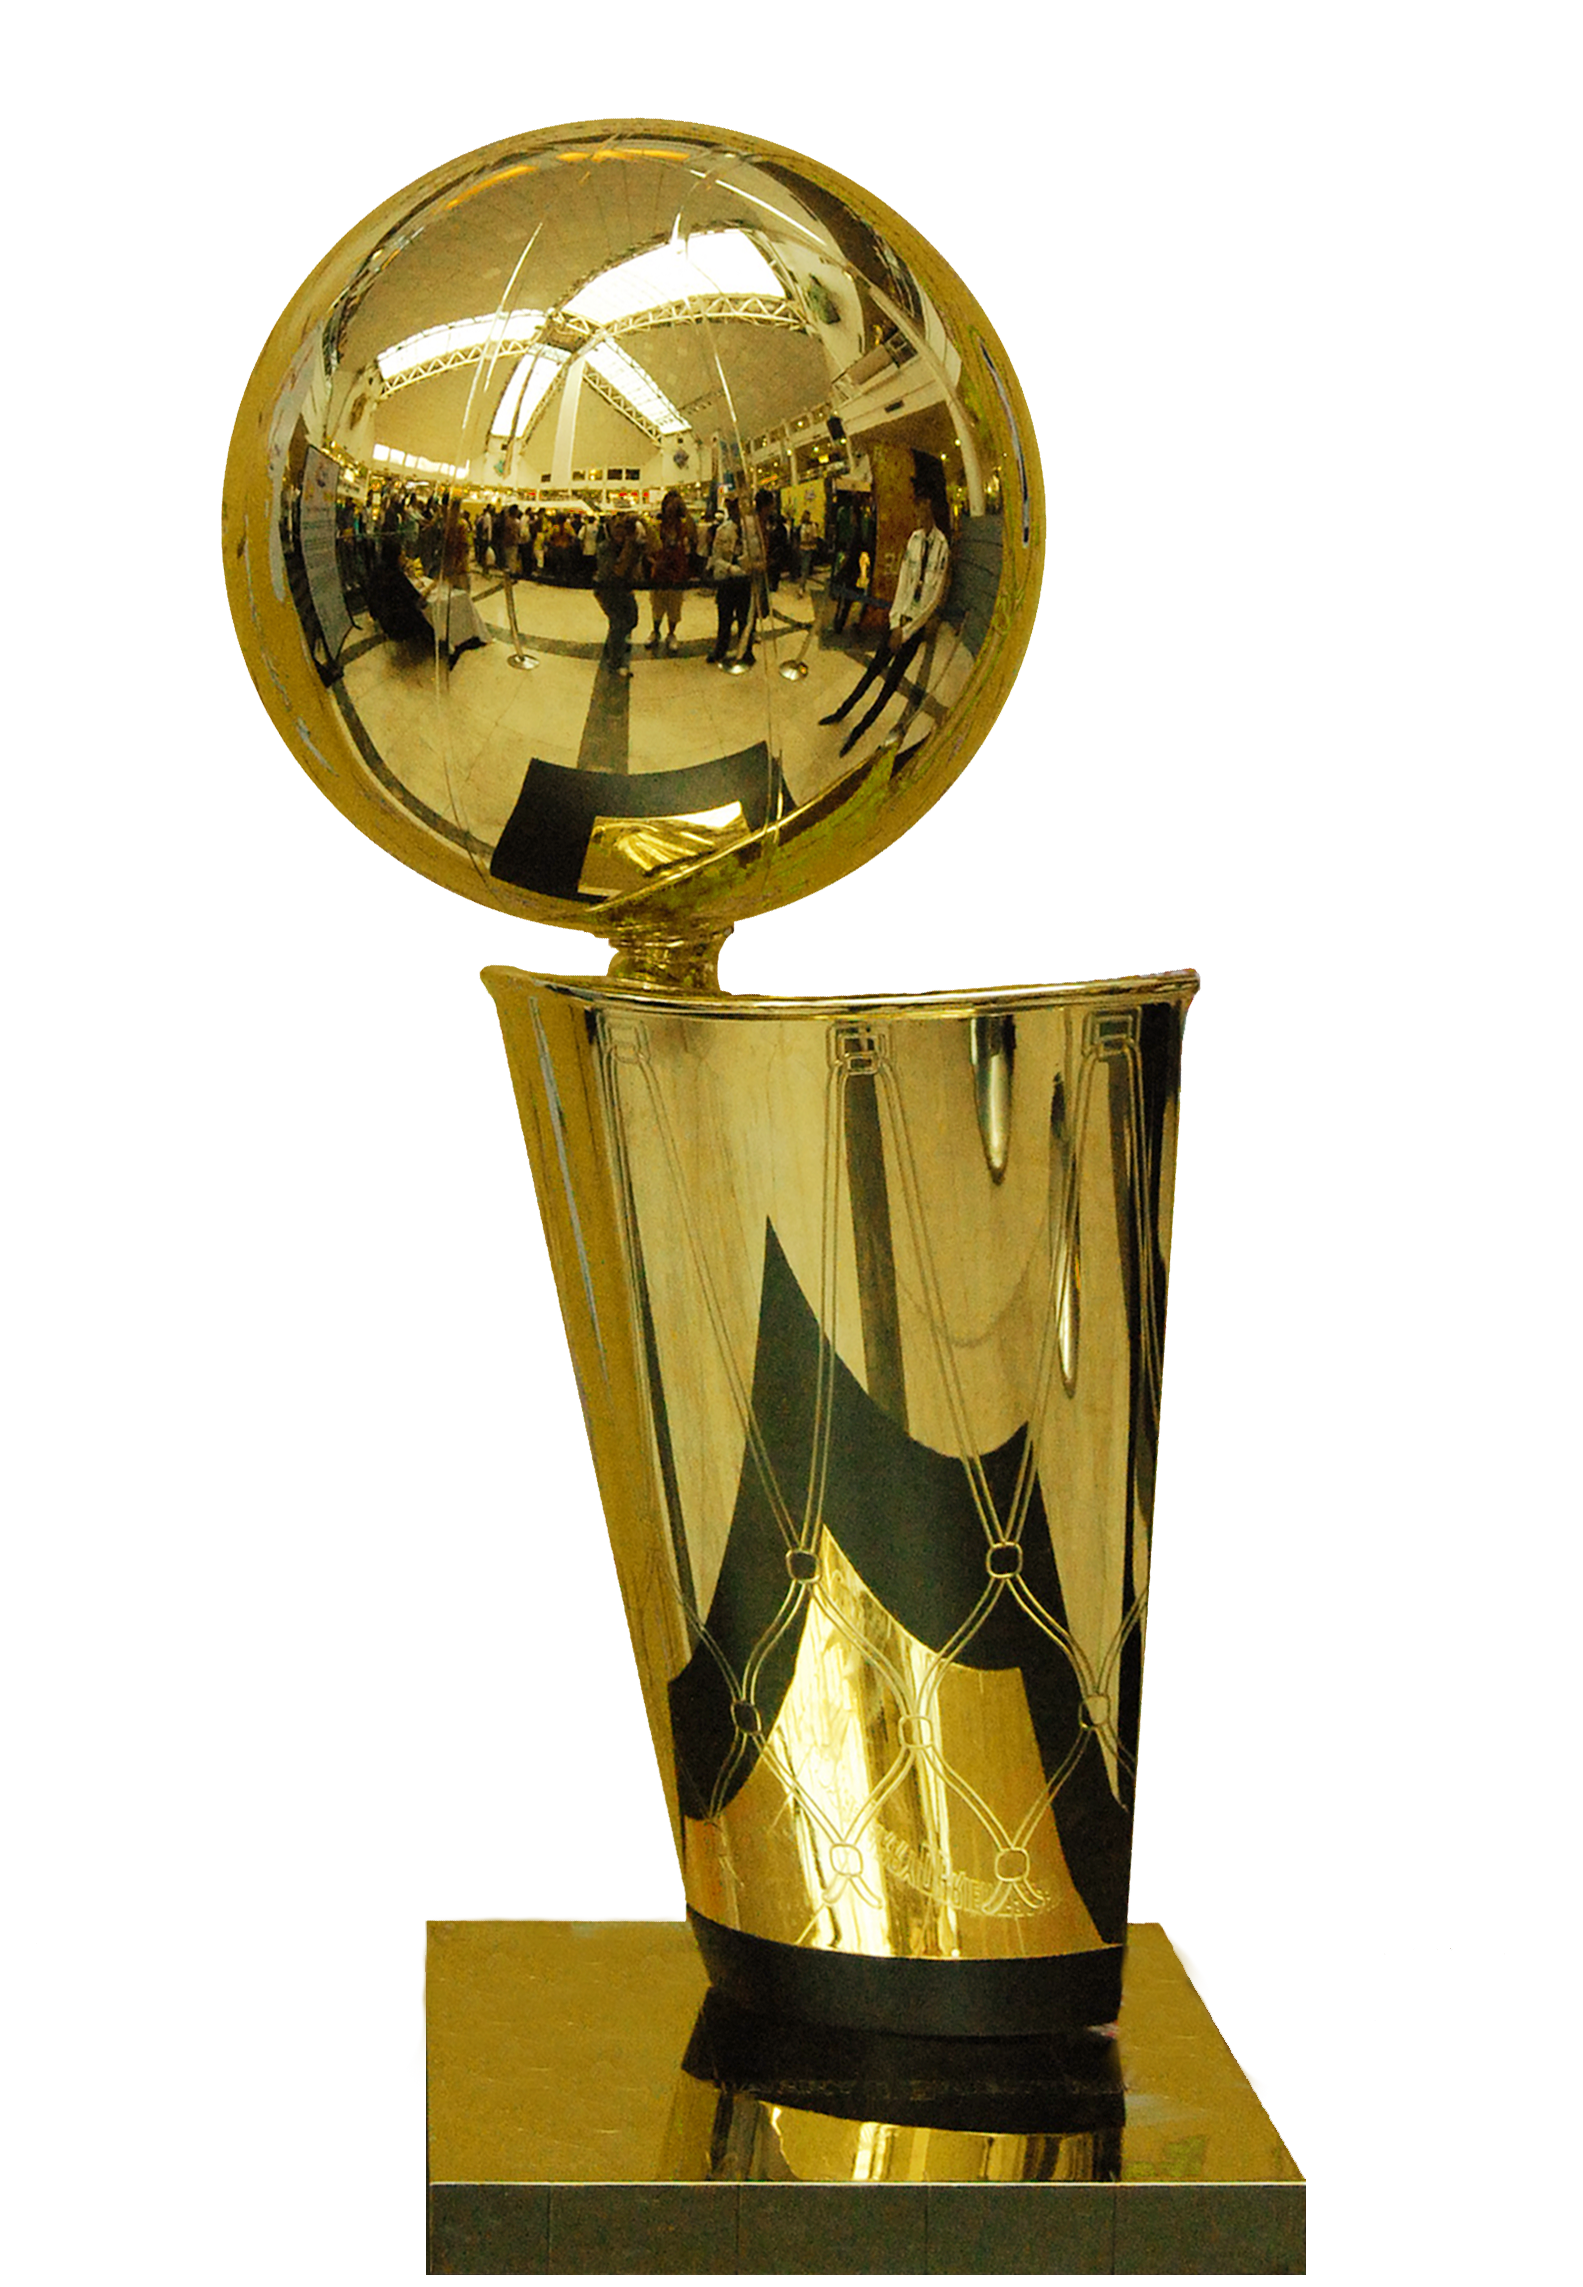 Larry O'Brien Trophy, The NBA trophy awarded to the champio…